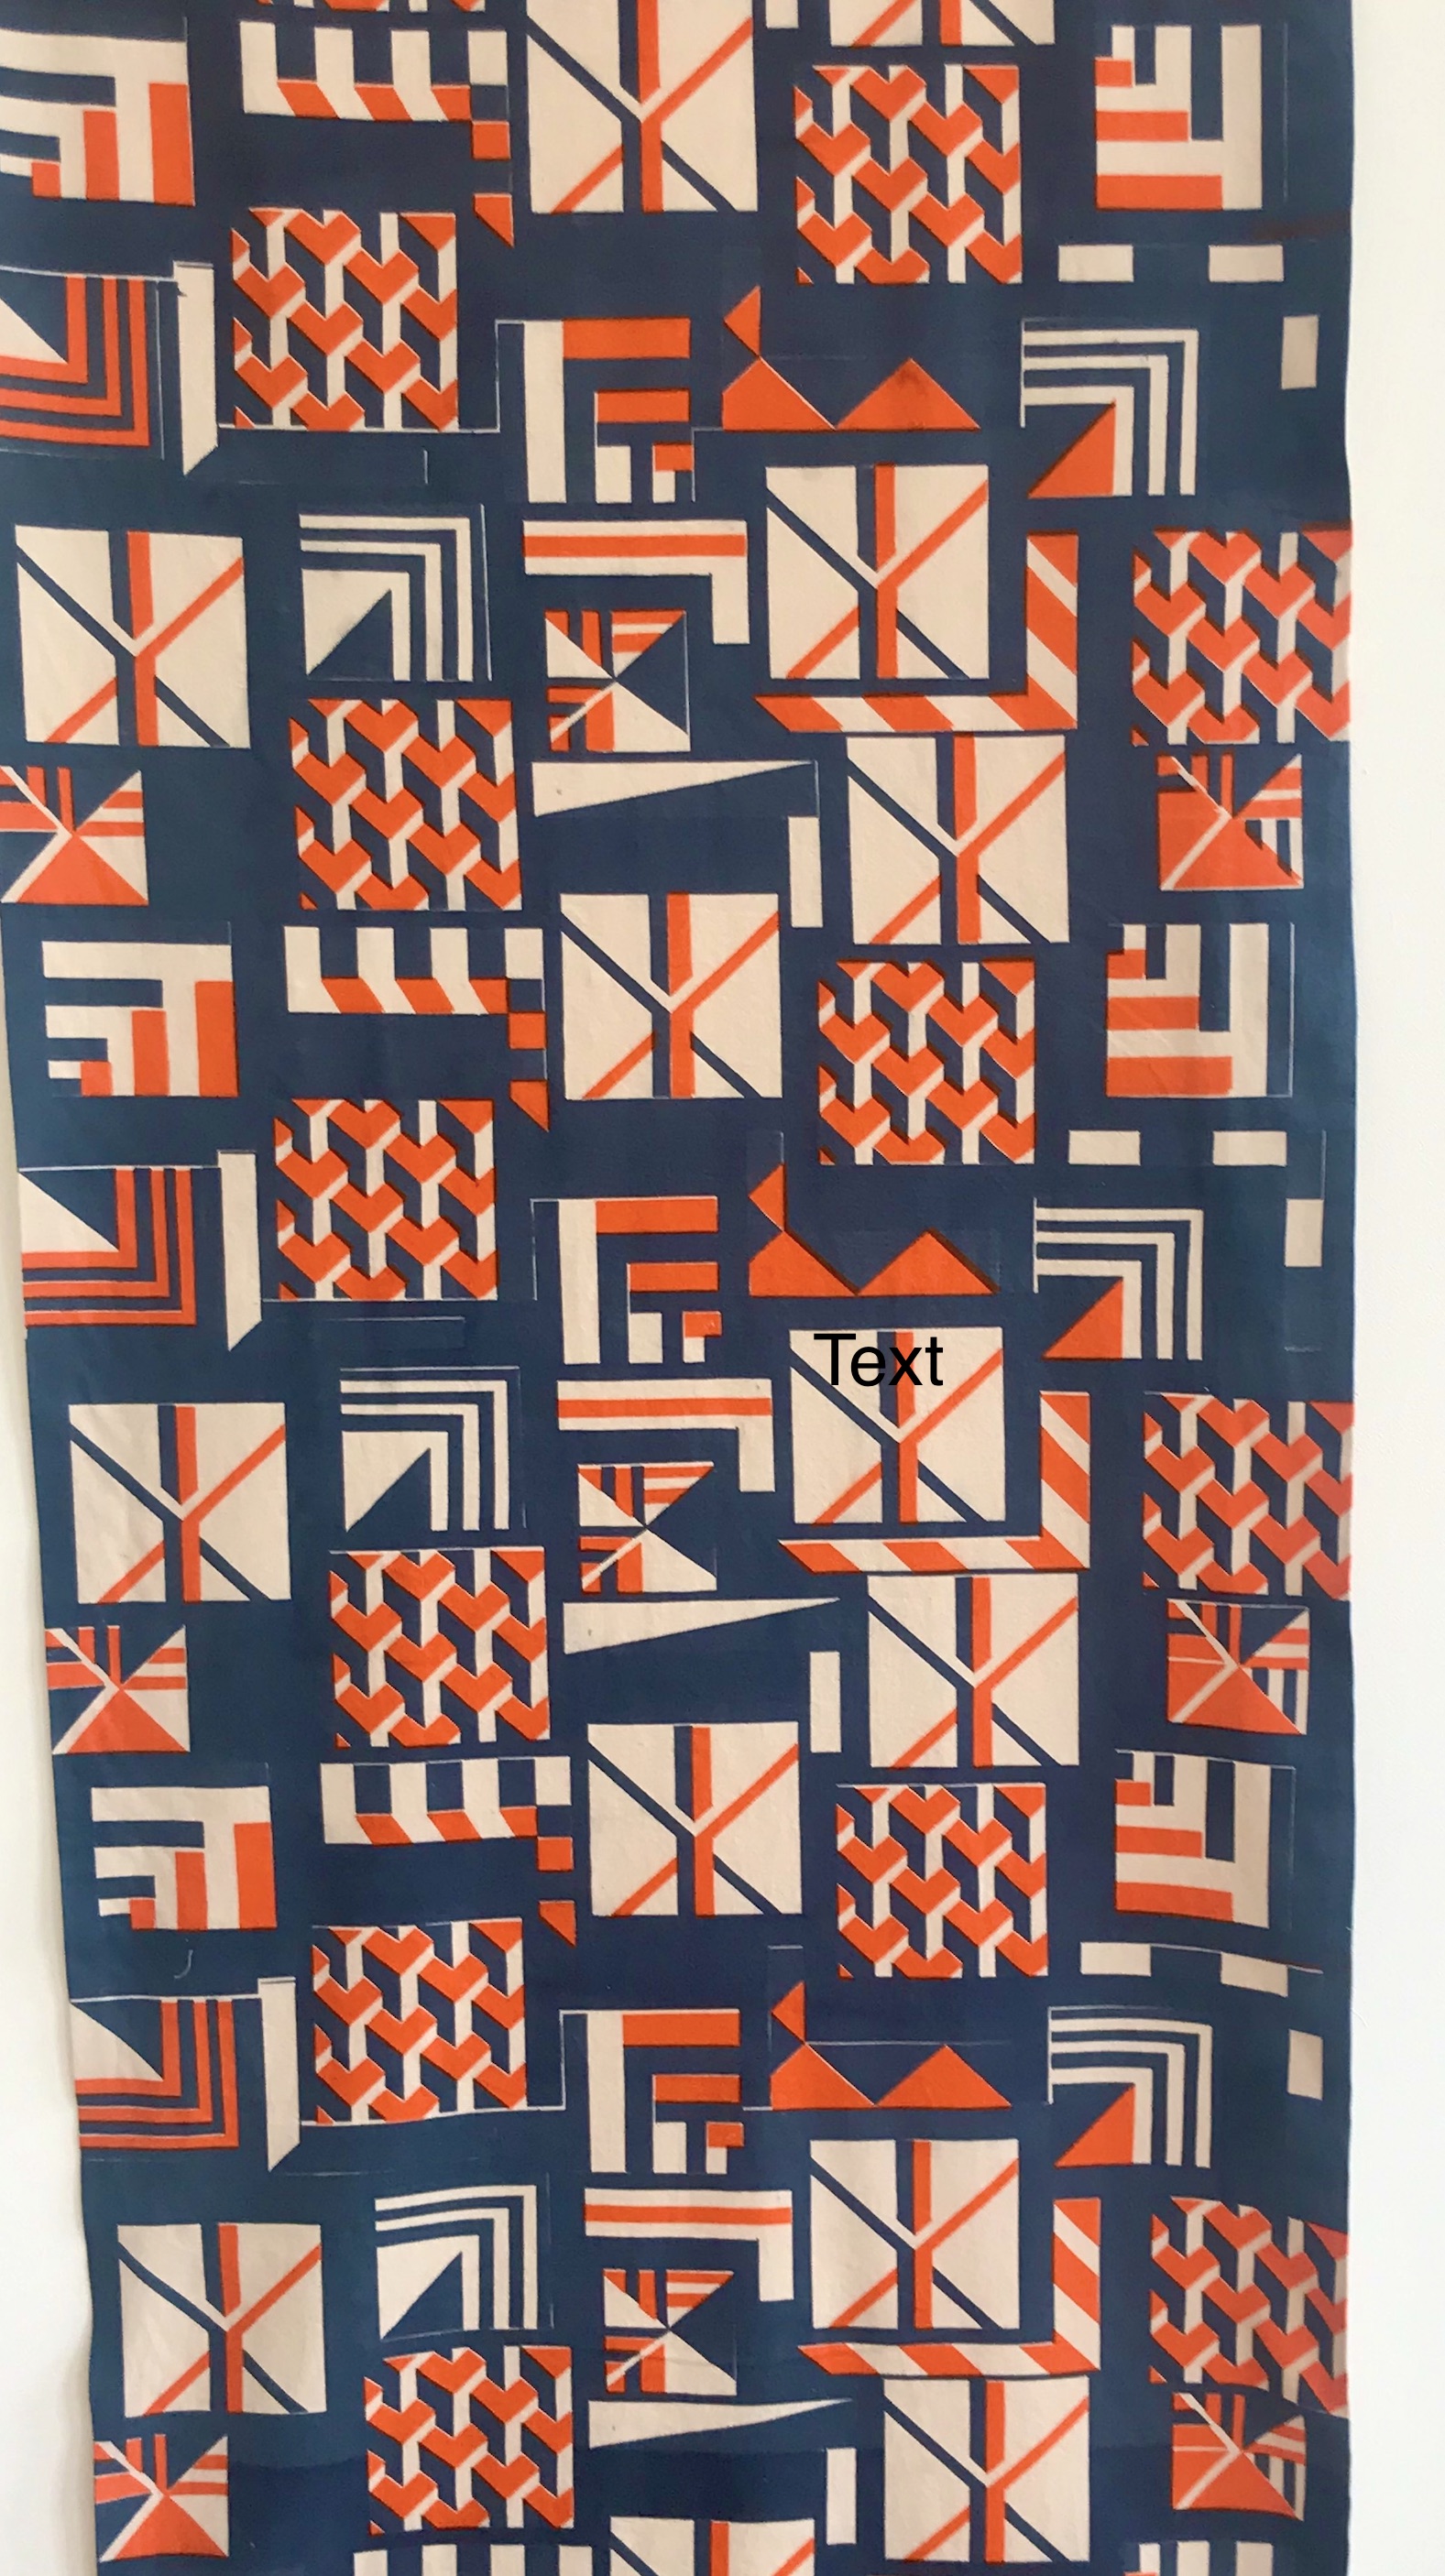 A repeat pattern length that can be used in either an interior or fashion context. Pattern is geometric cream and orange on dark blue.